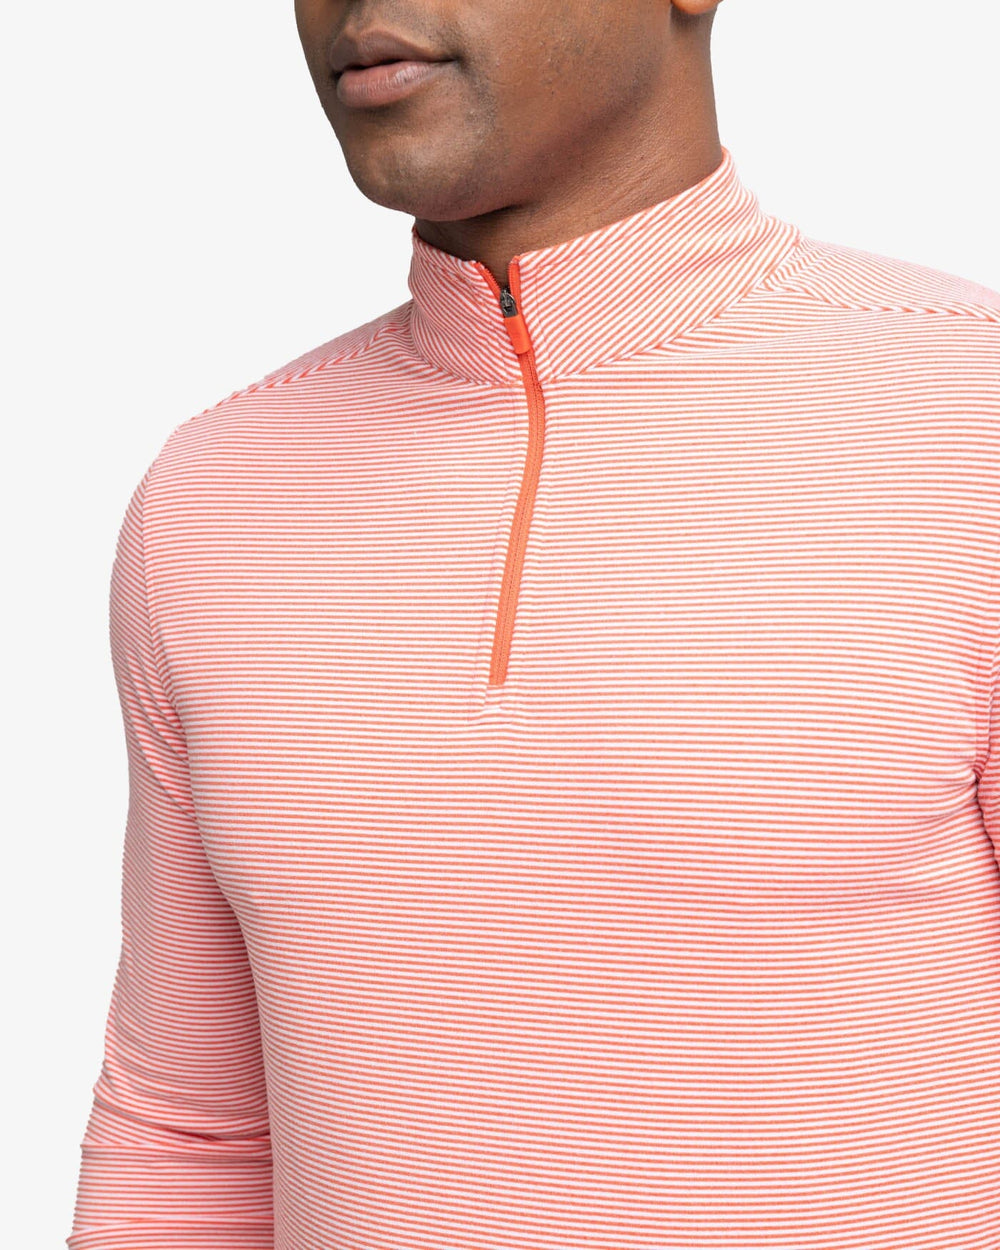 The detail view of the Southern Tide Cruiser Micro-Stripe Heather Quarter Zip by Southern Tide - Heather Endzone Orange